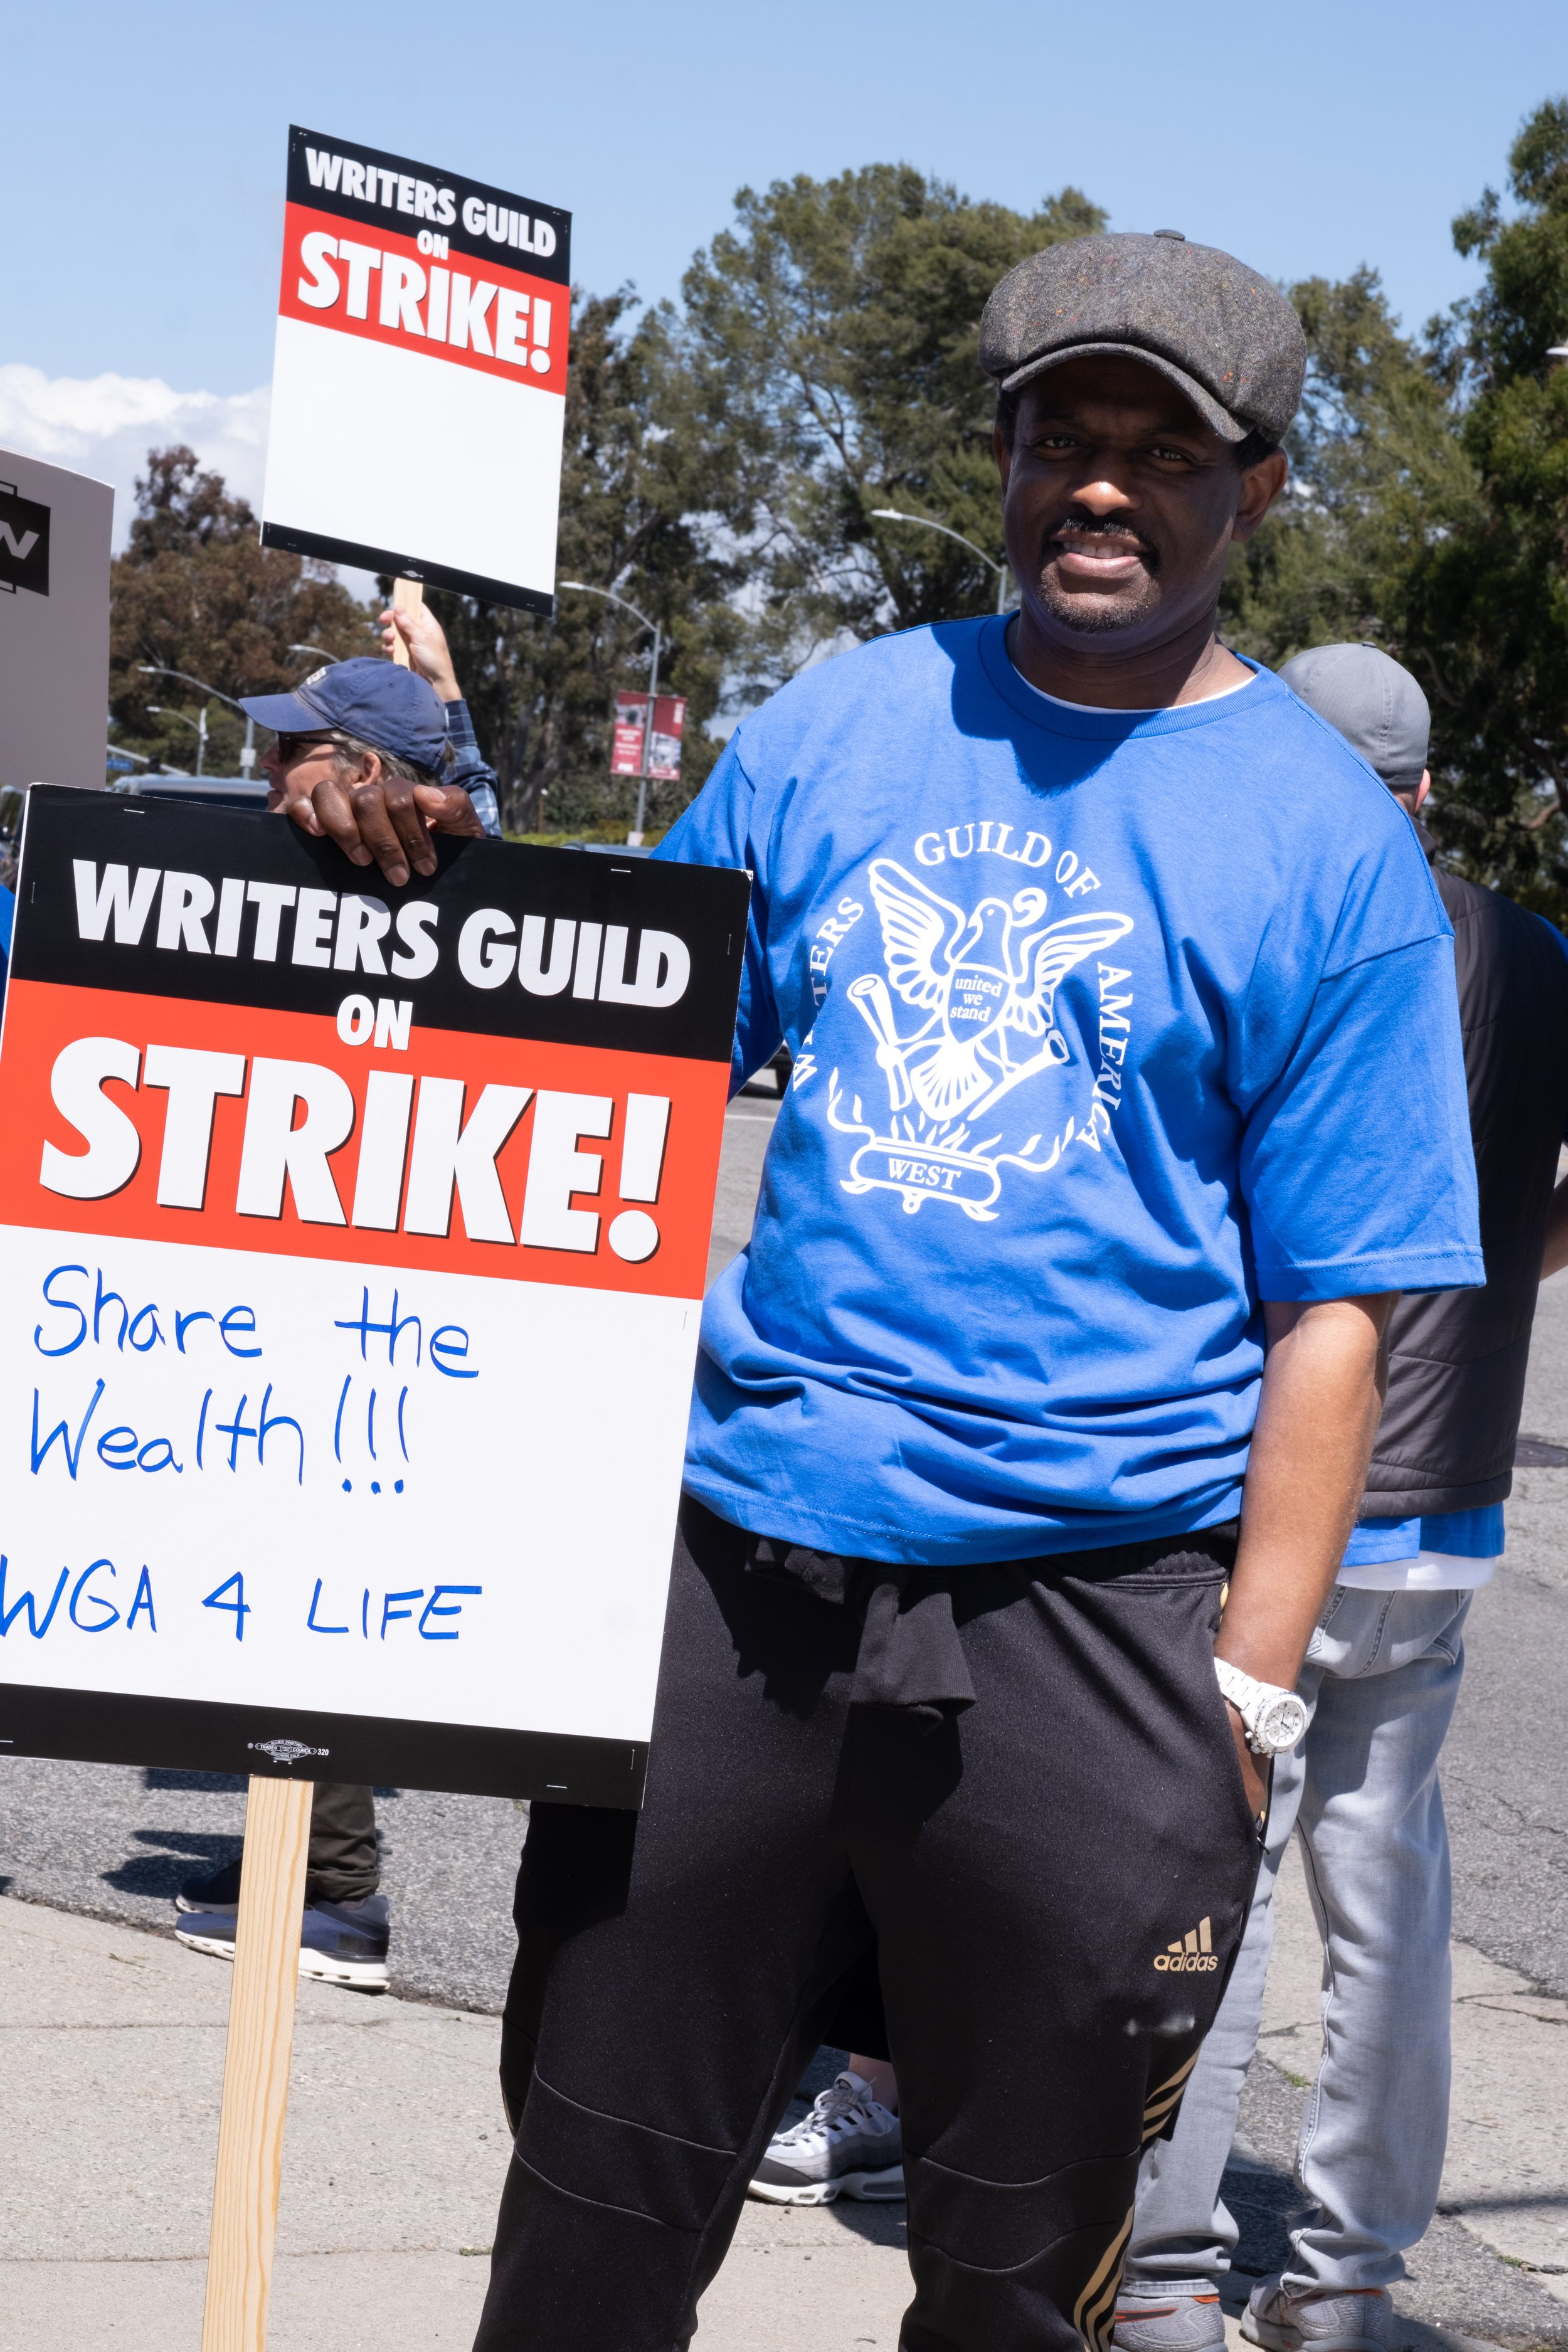  Matt Claybrooks, a writer and member of the Writers Guild of America, participates in the protests supporting the WGA strike in front of Fox Studios on Pico Blvd in Los Angeles, Calif. on Tuesday May 2nd, 2023. He states, "We were there last night u